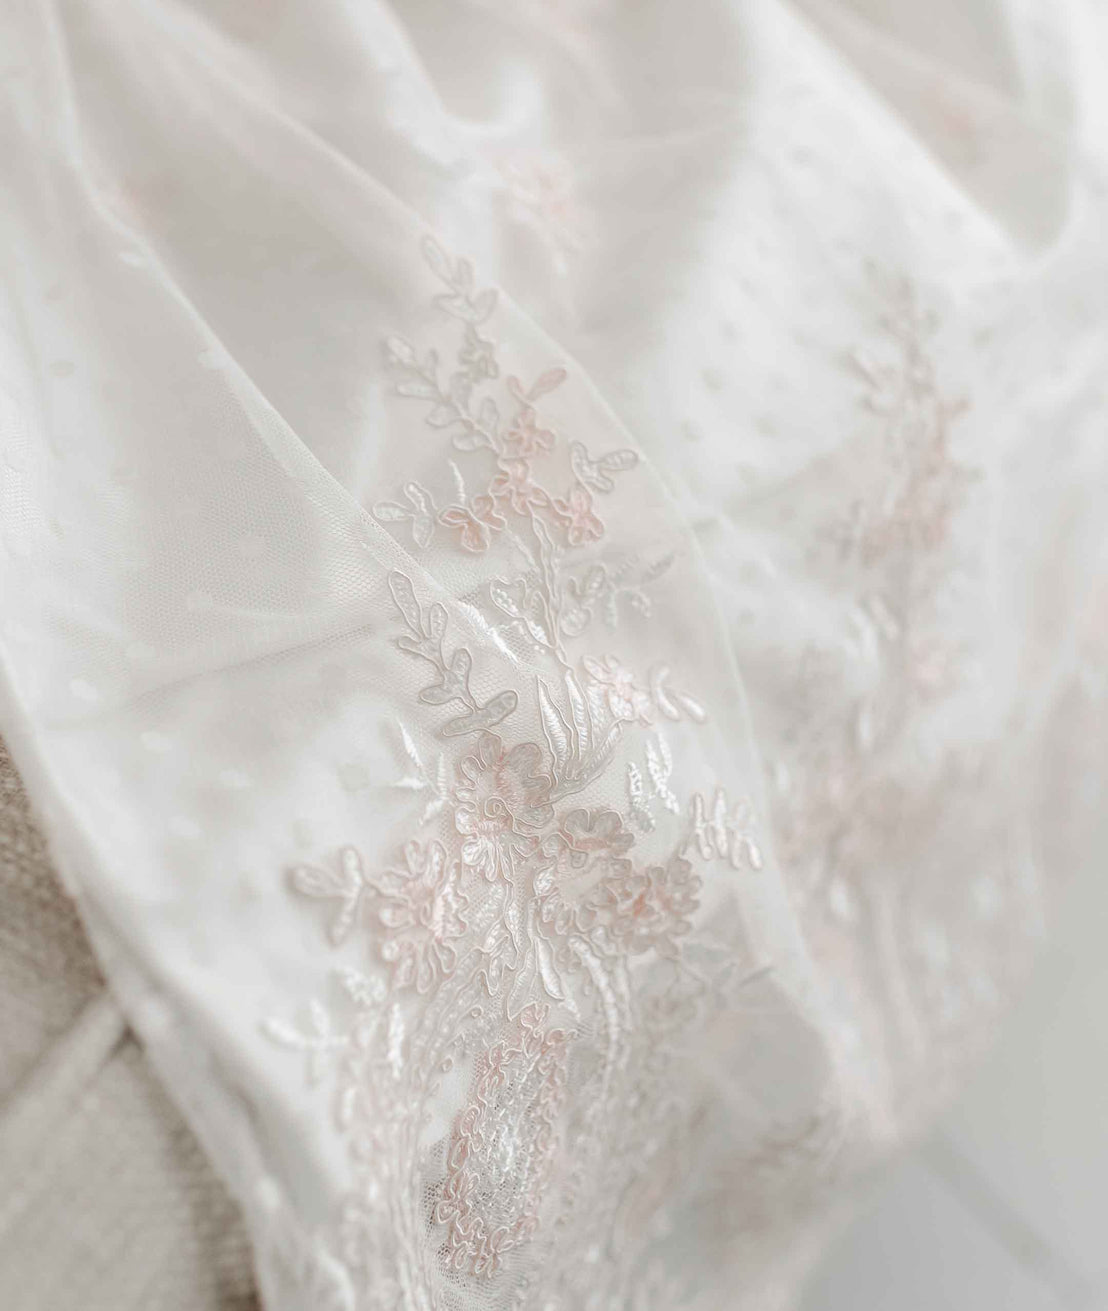 Close-up of the delicate white silk from the Elizabeth Christening Gown's skirt. The skirt features intricate floral embroidery and beadwork, conveying an elegant and textured appearance.